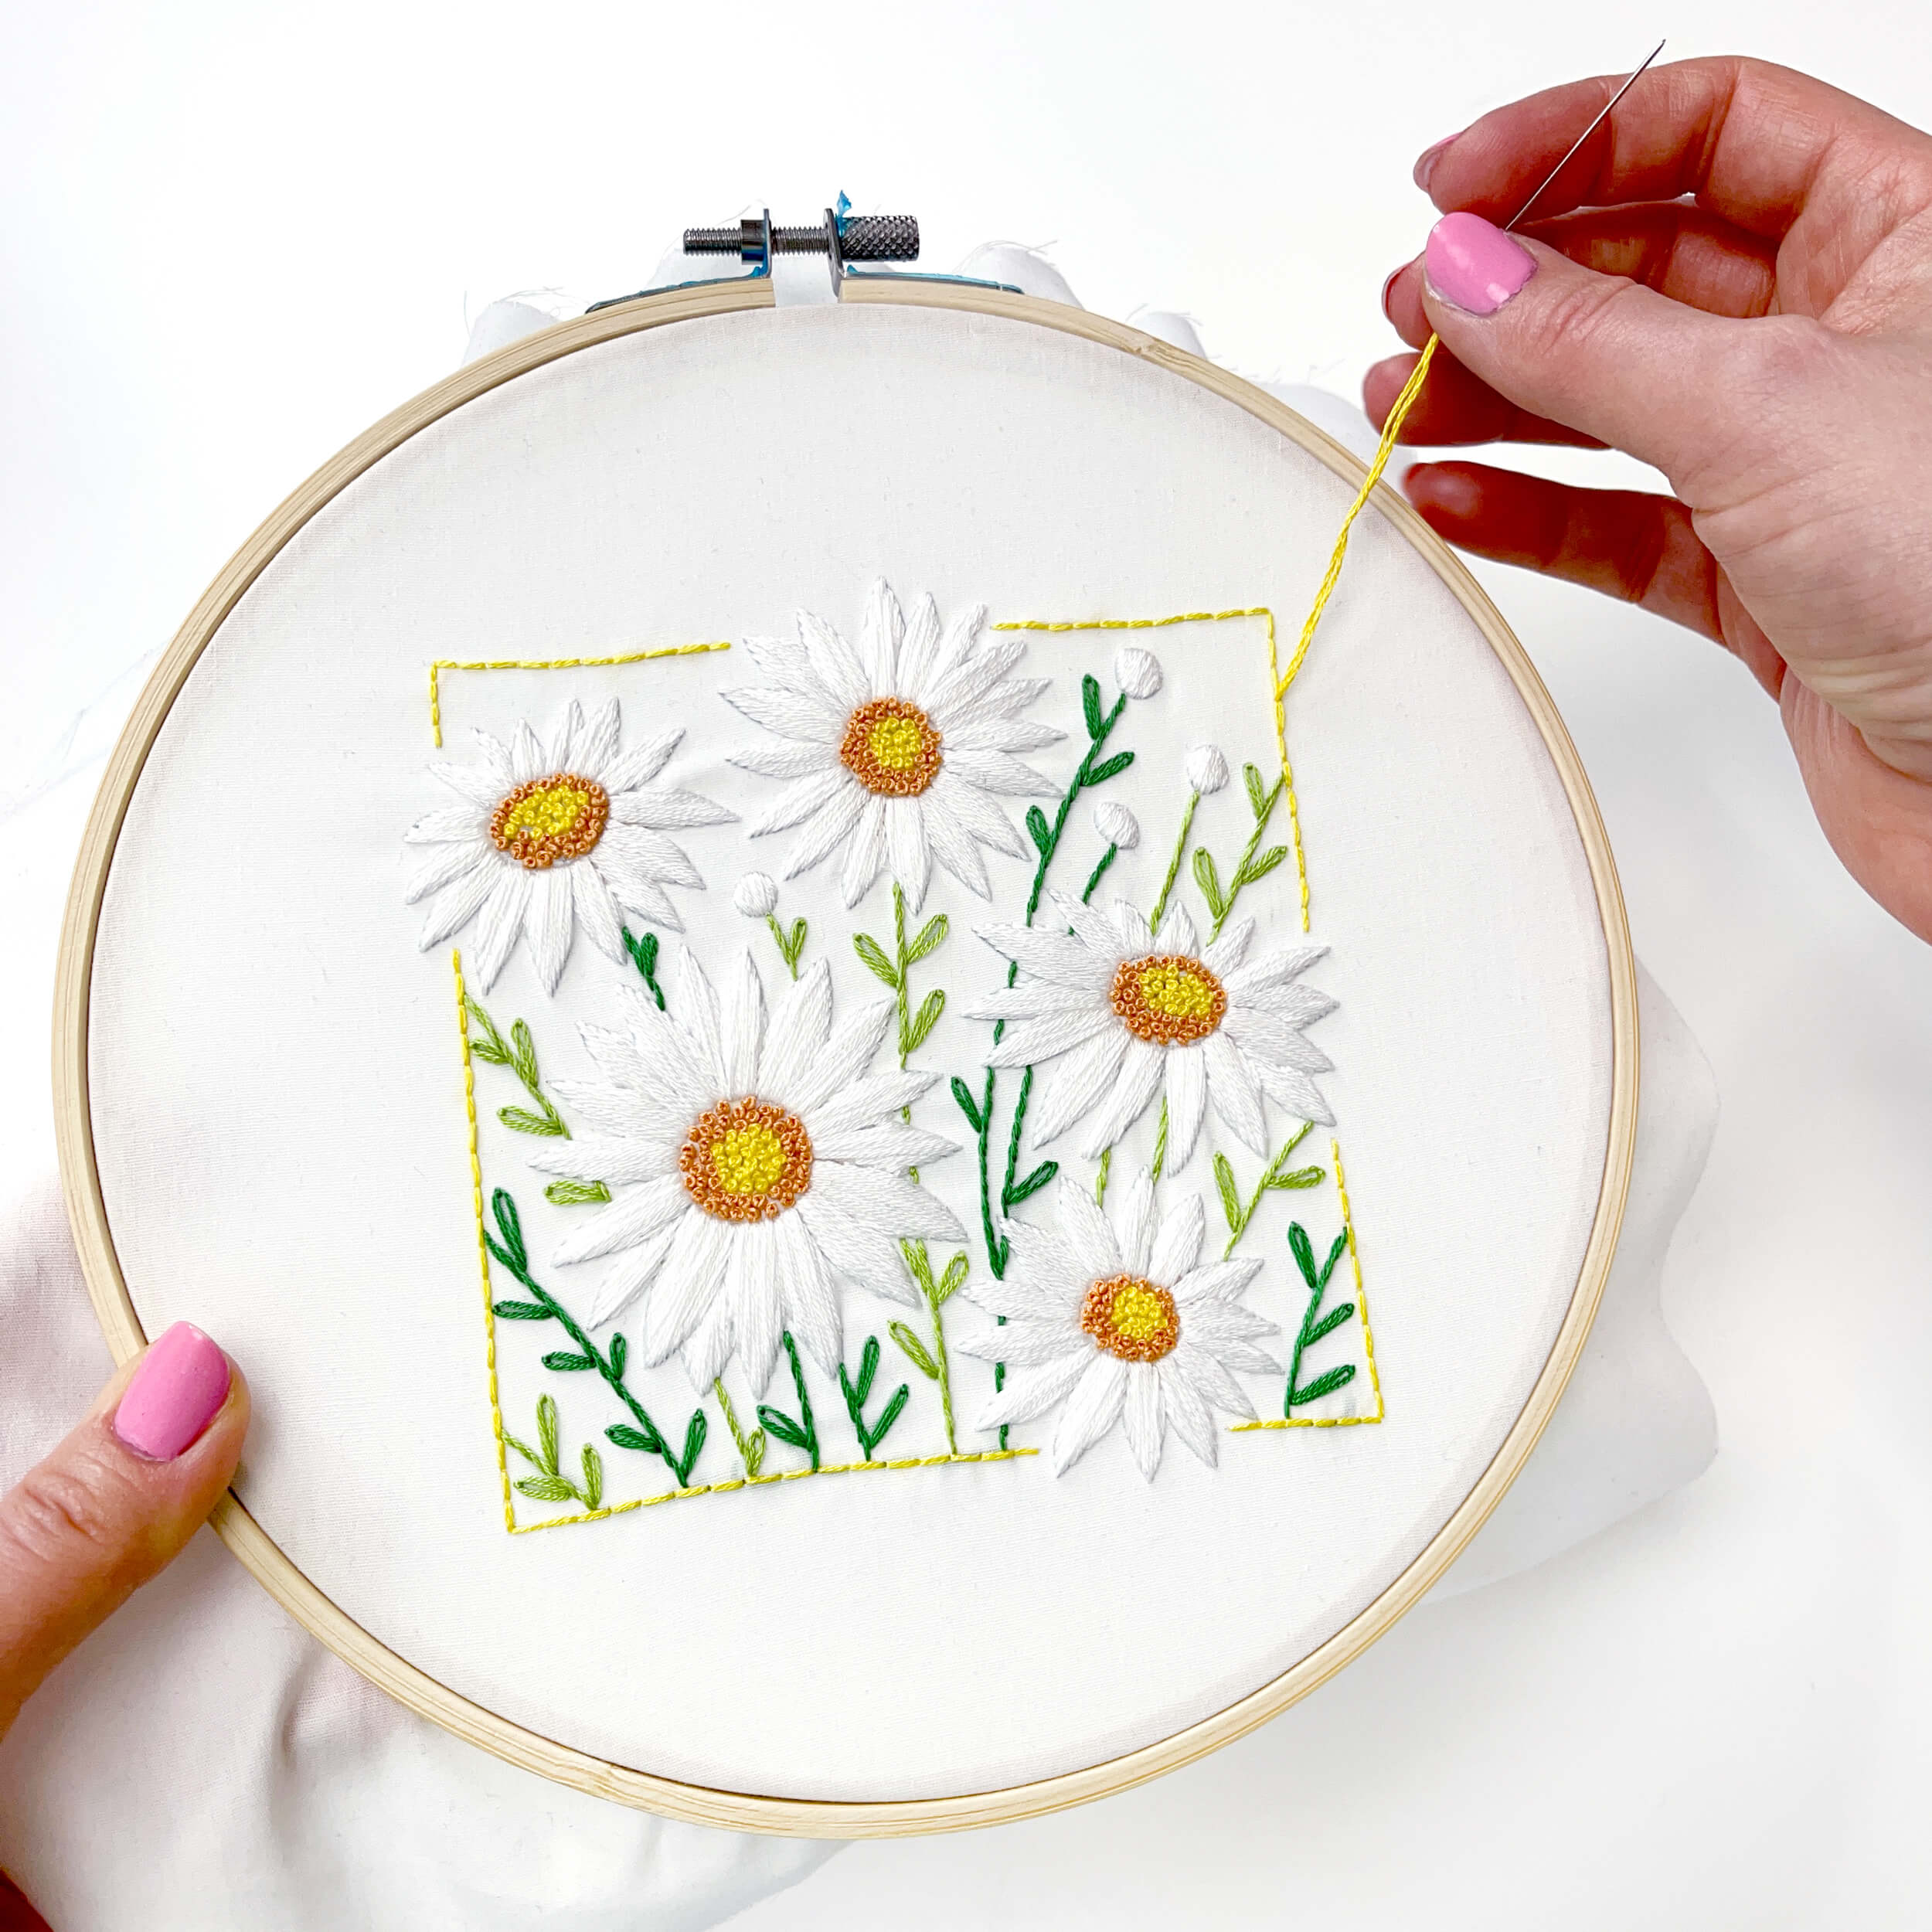 hand stitching the april daisy embroidery pattern